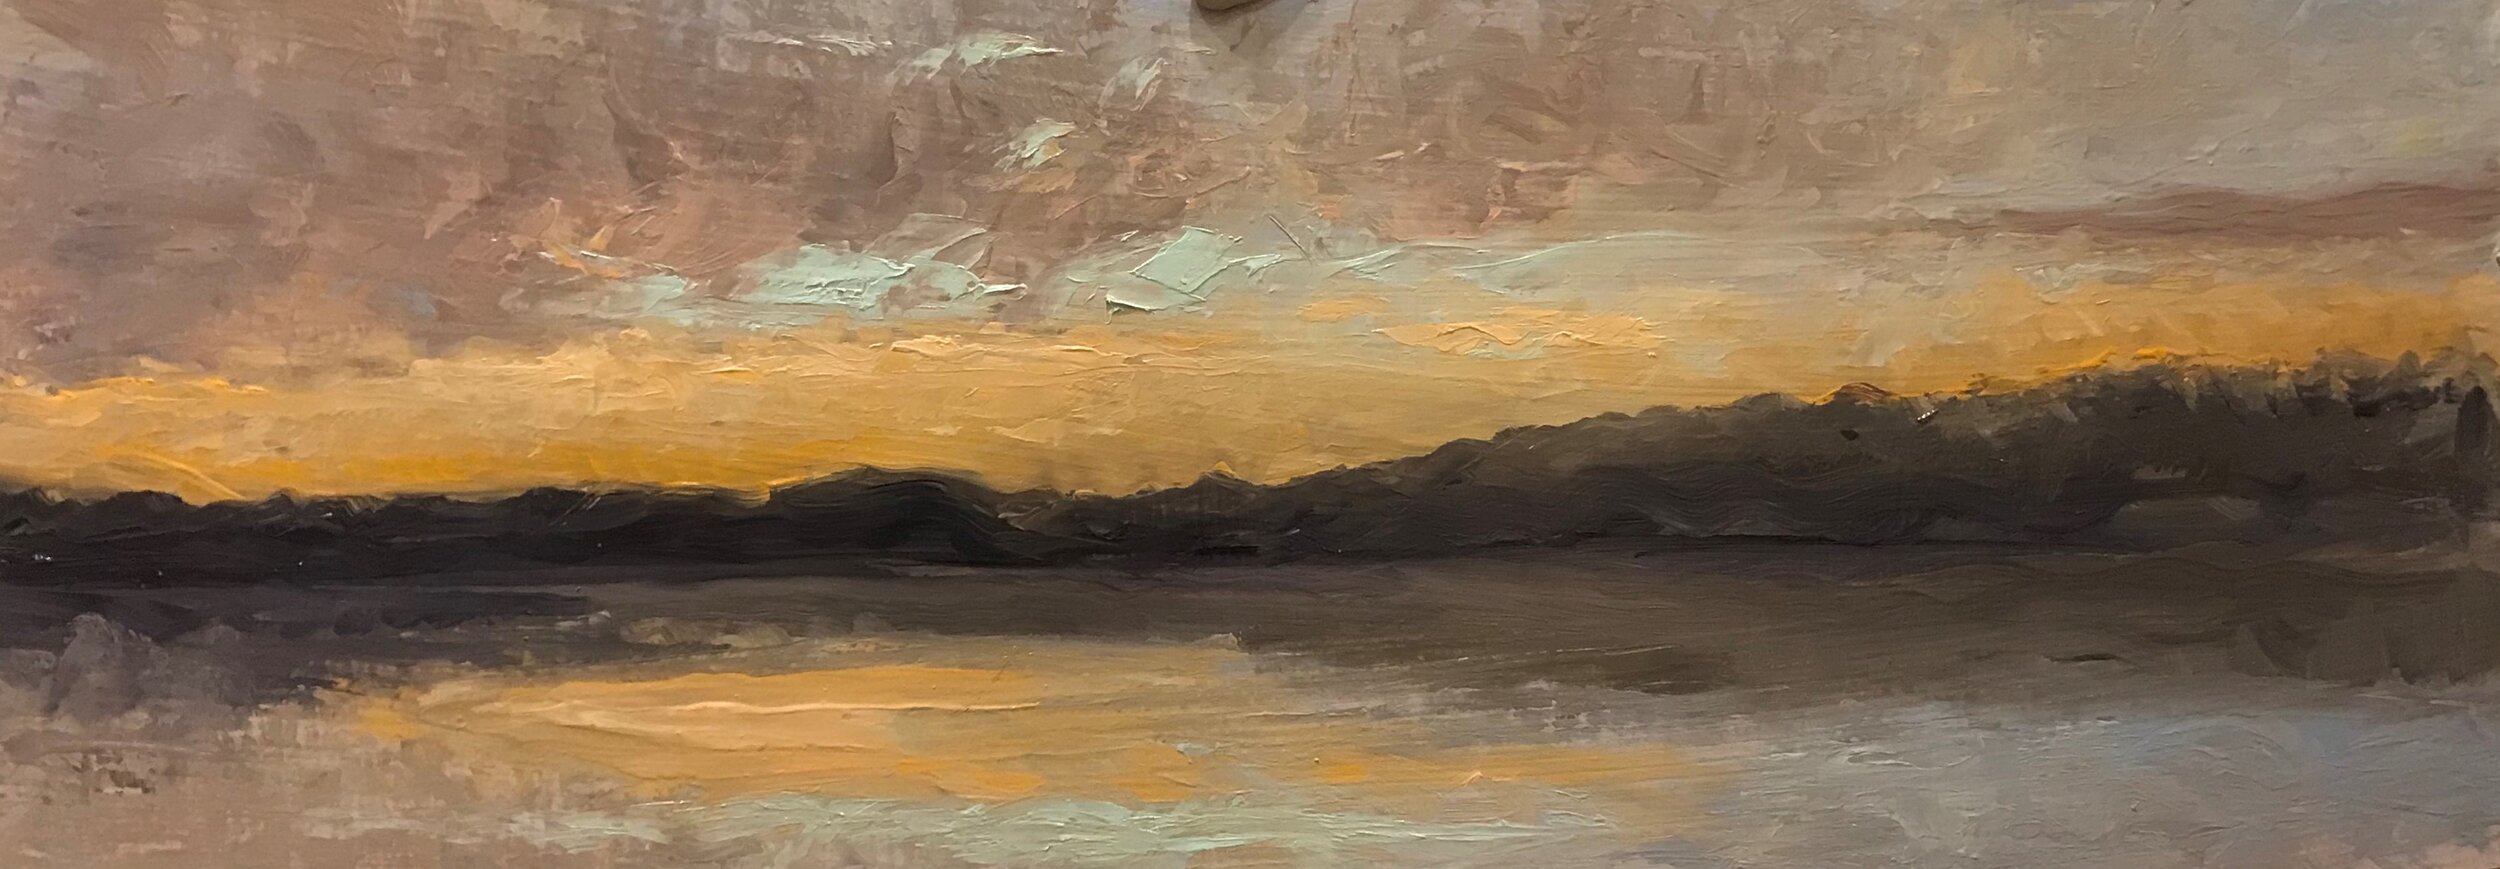 20-05-01 Lost Lake  Oil on Panel  9 x 24 inches.jpg